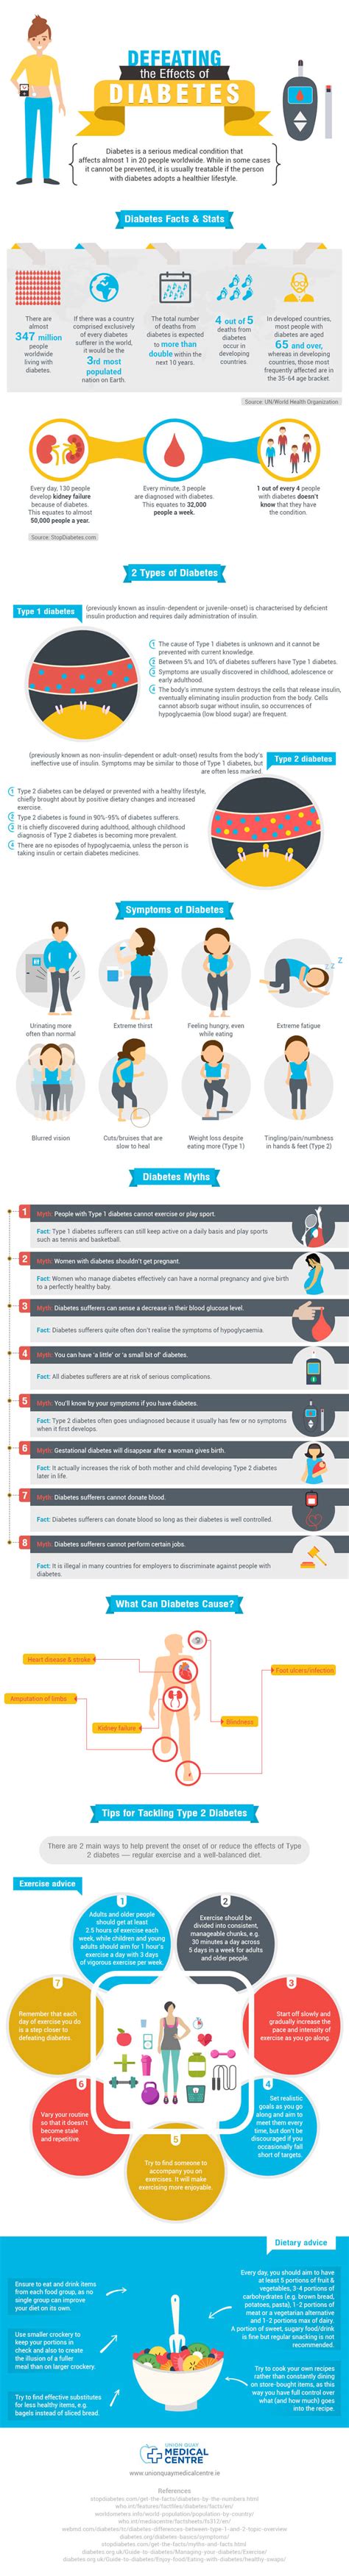 Infographic Defeating The Effects Of Diabetes